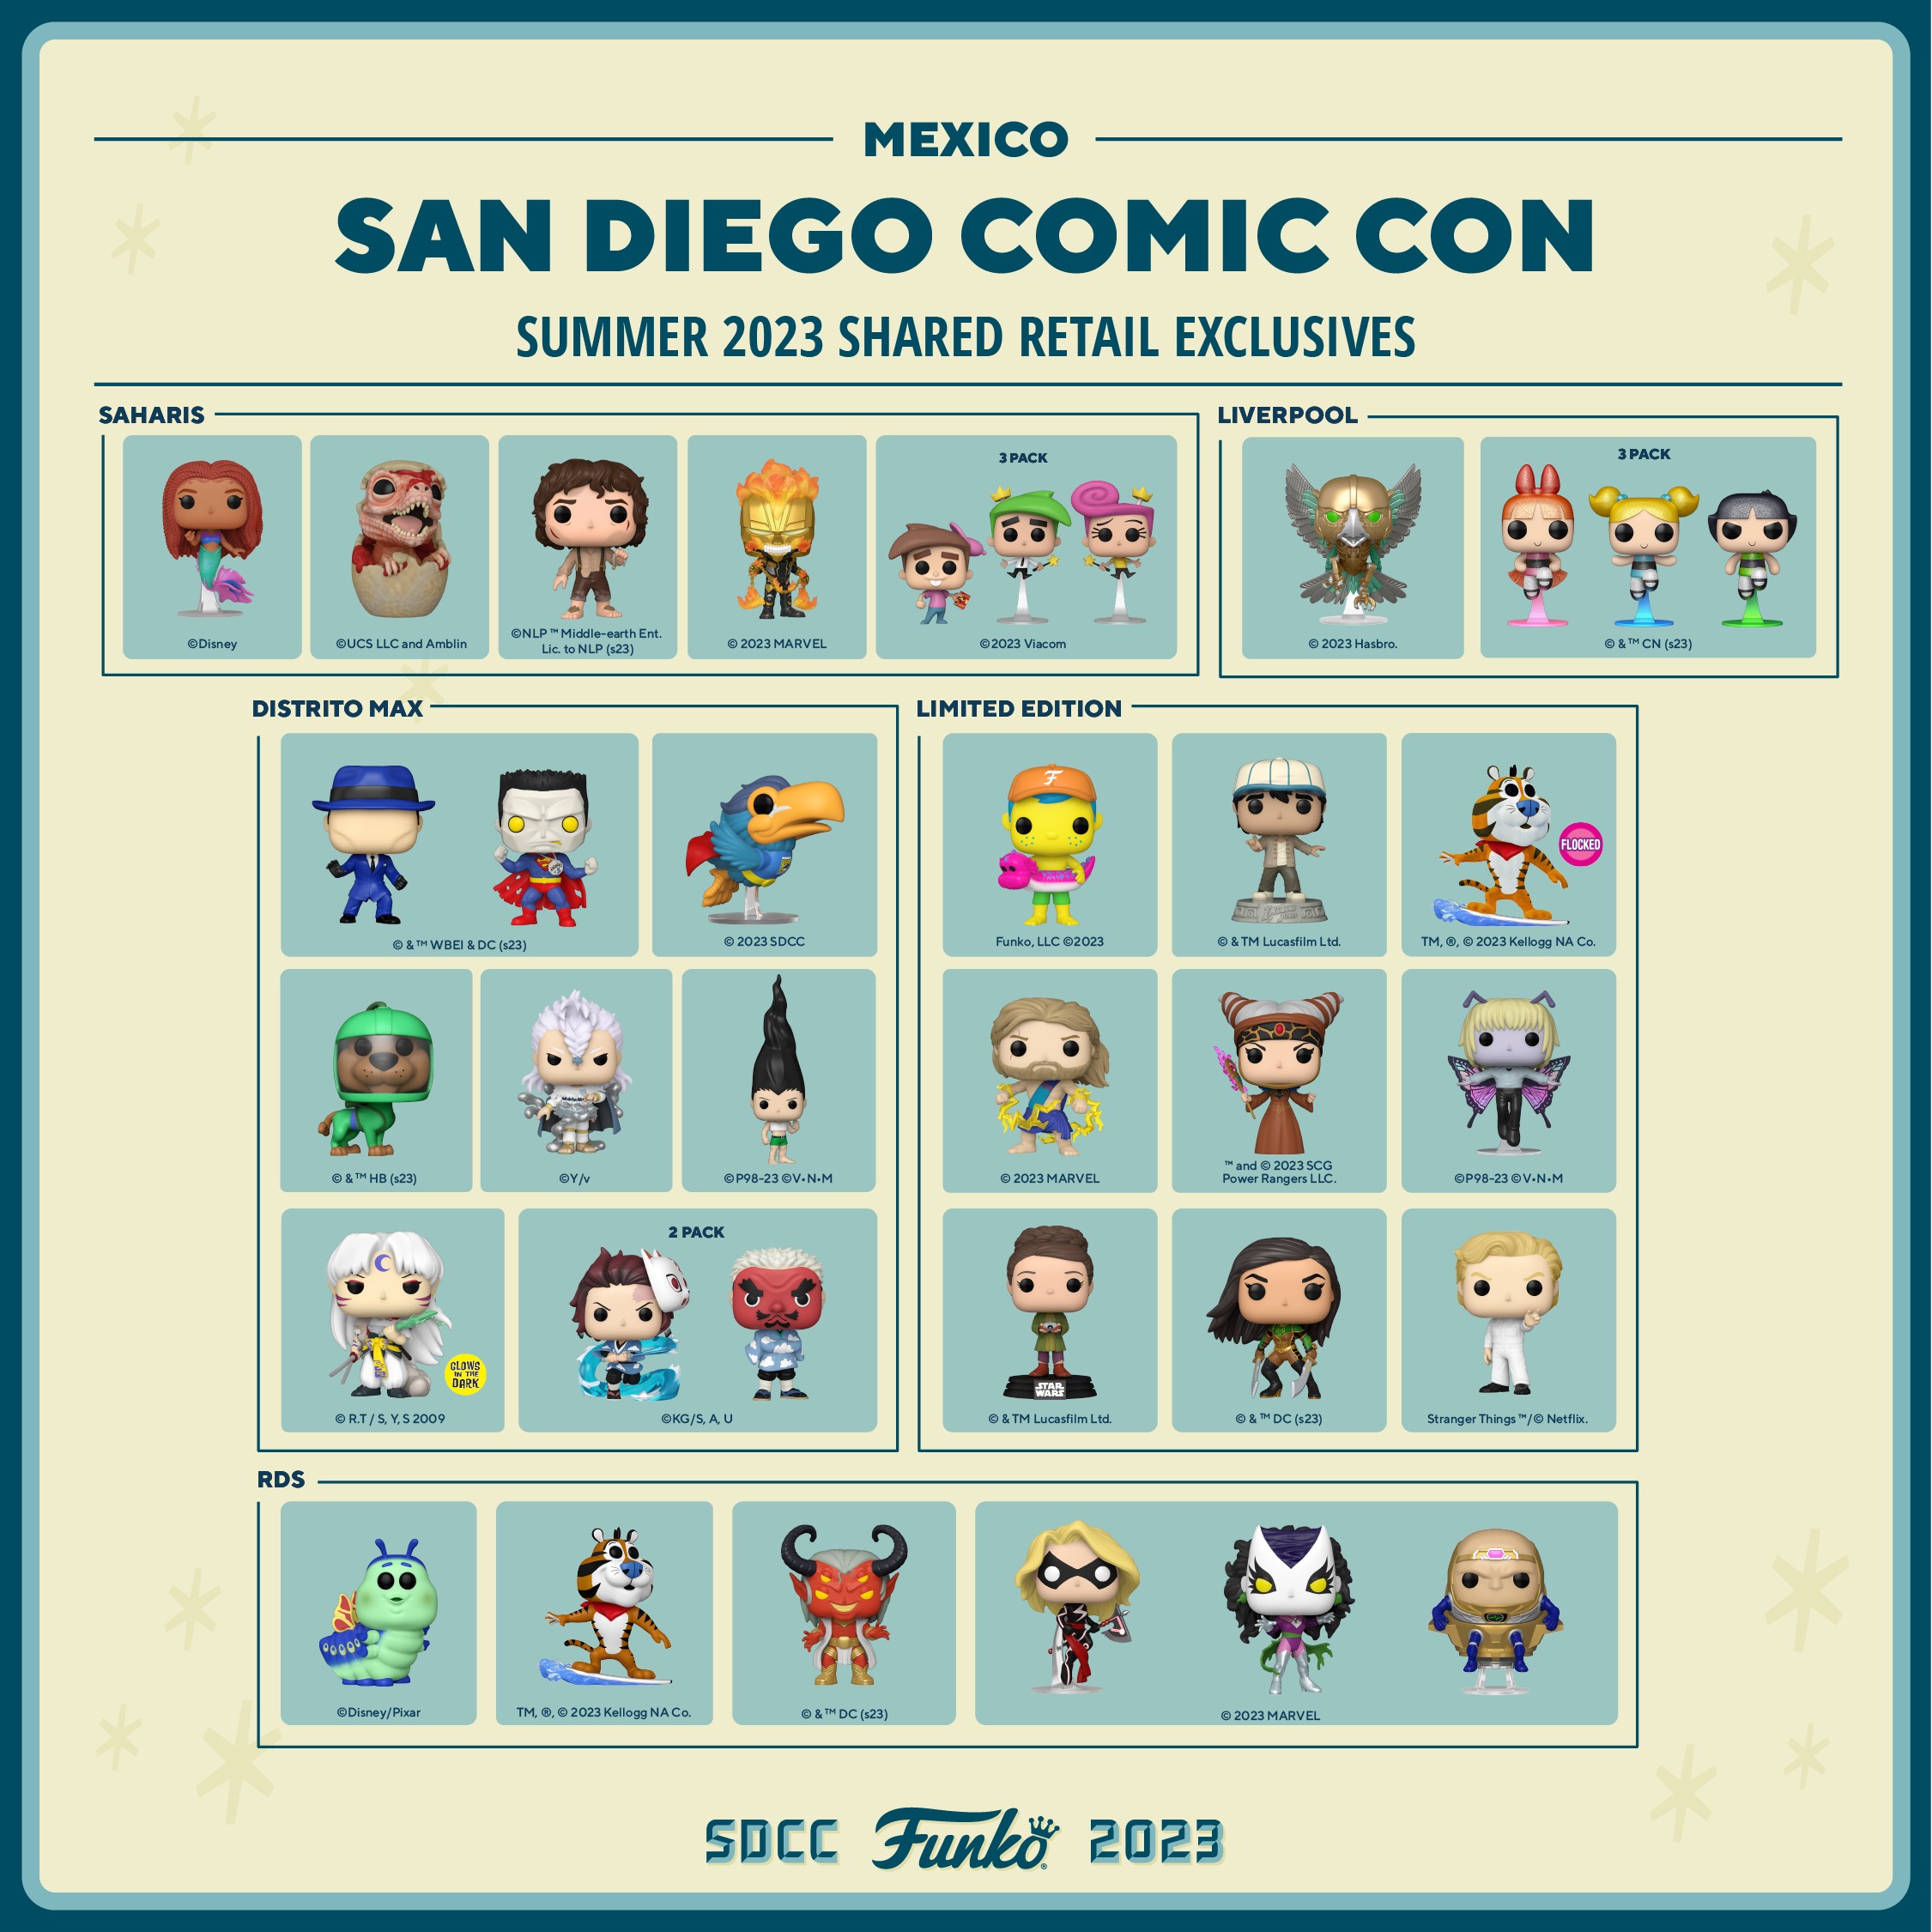 This just in from the Funkoville Visitor's Center, here is the 2023 SDCC Shared Retailer Guide for Mexico!